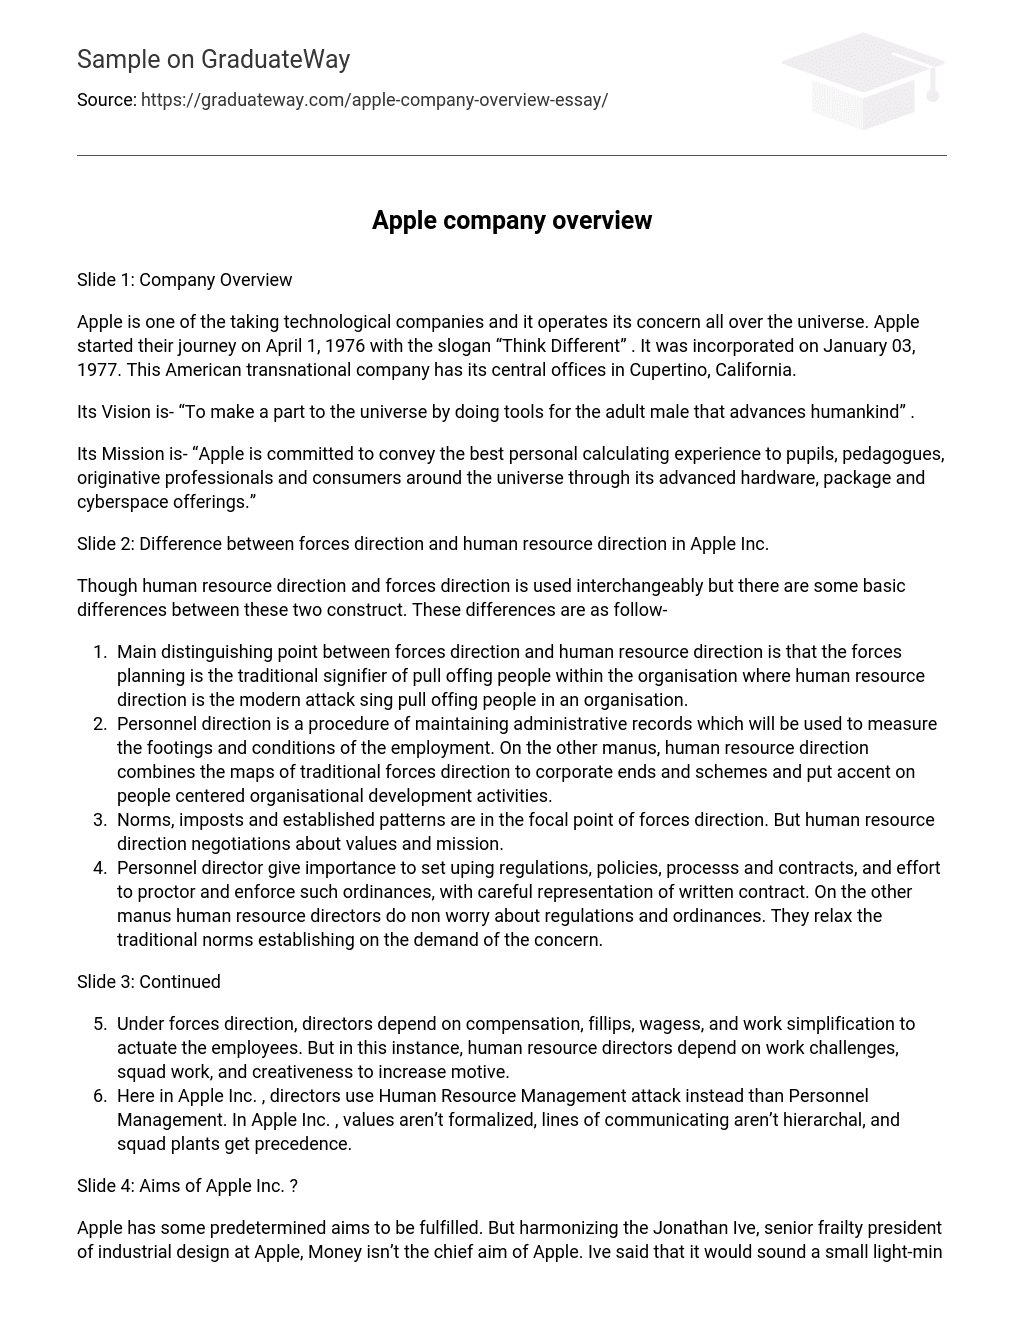 Apple company overview